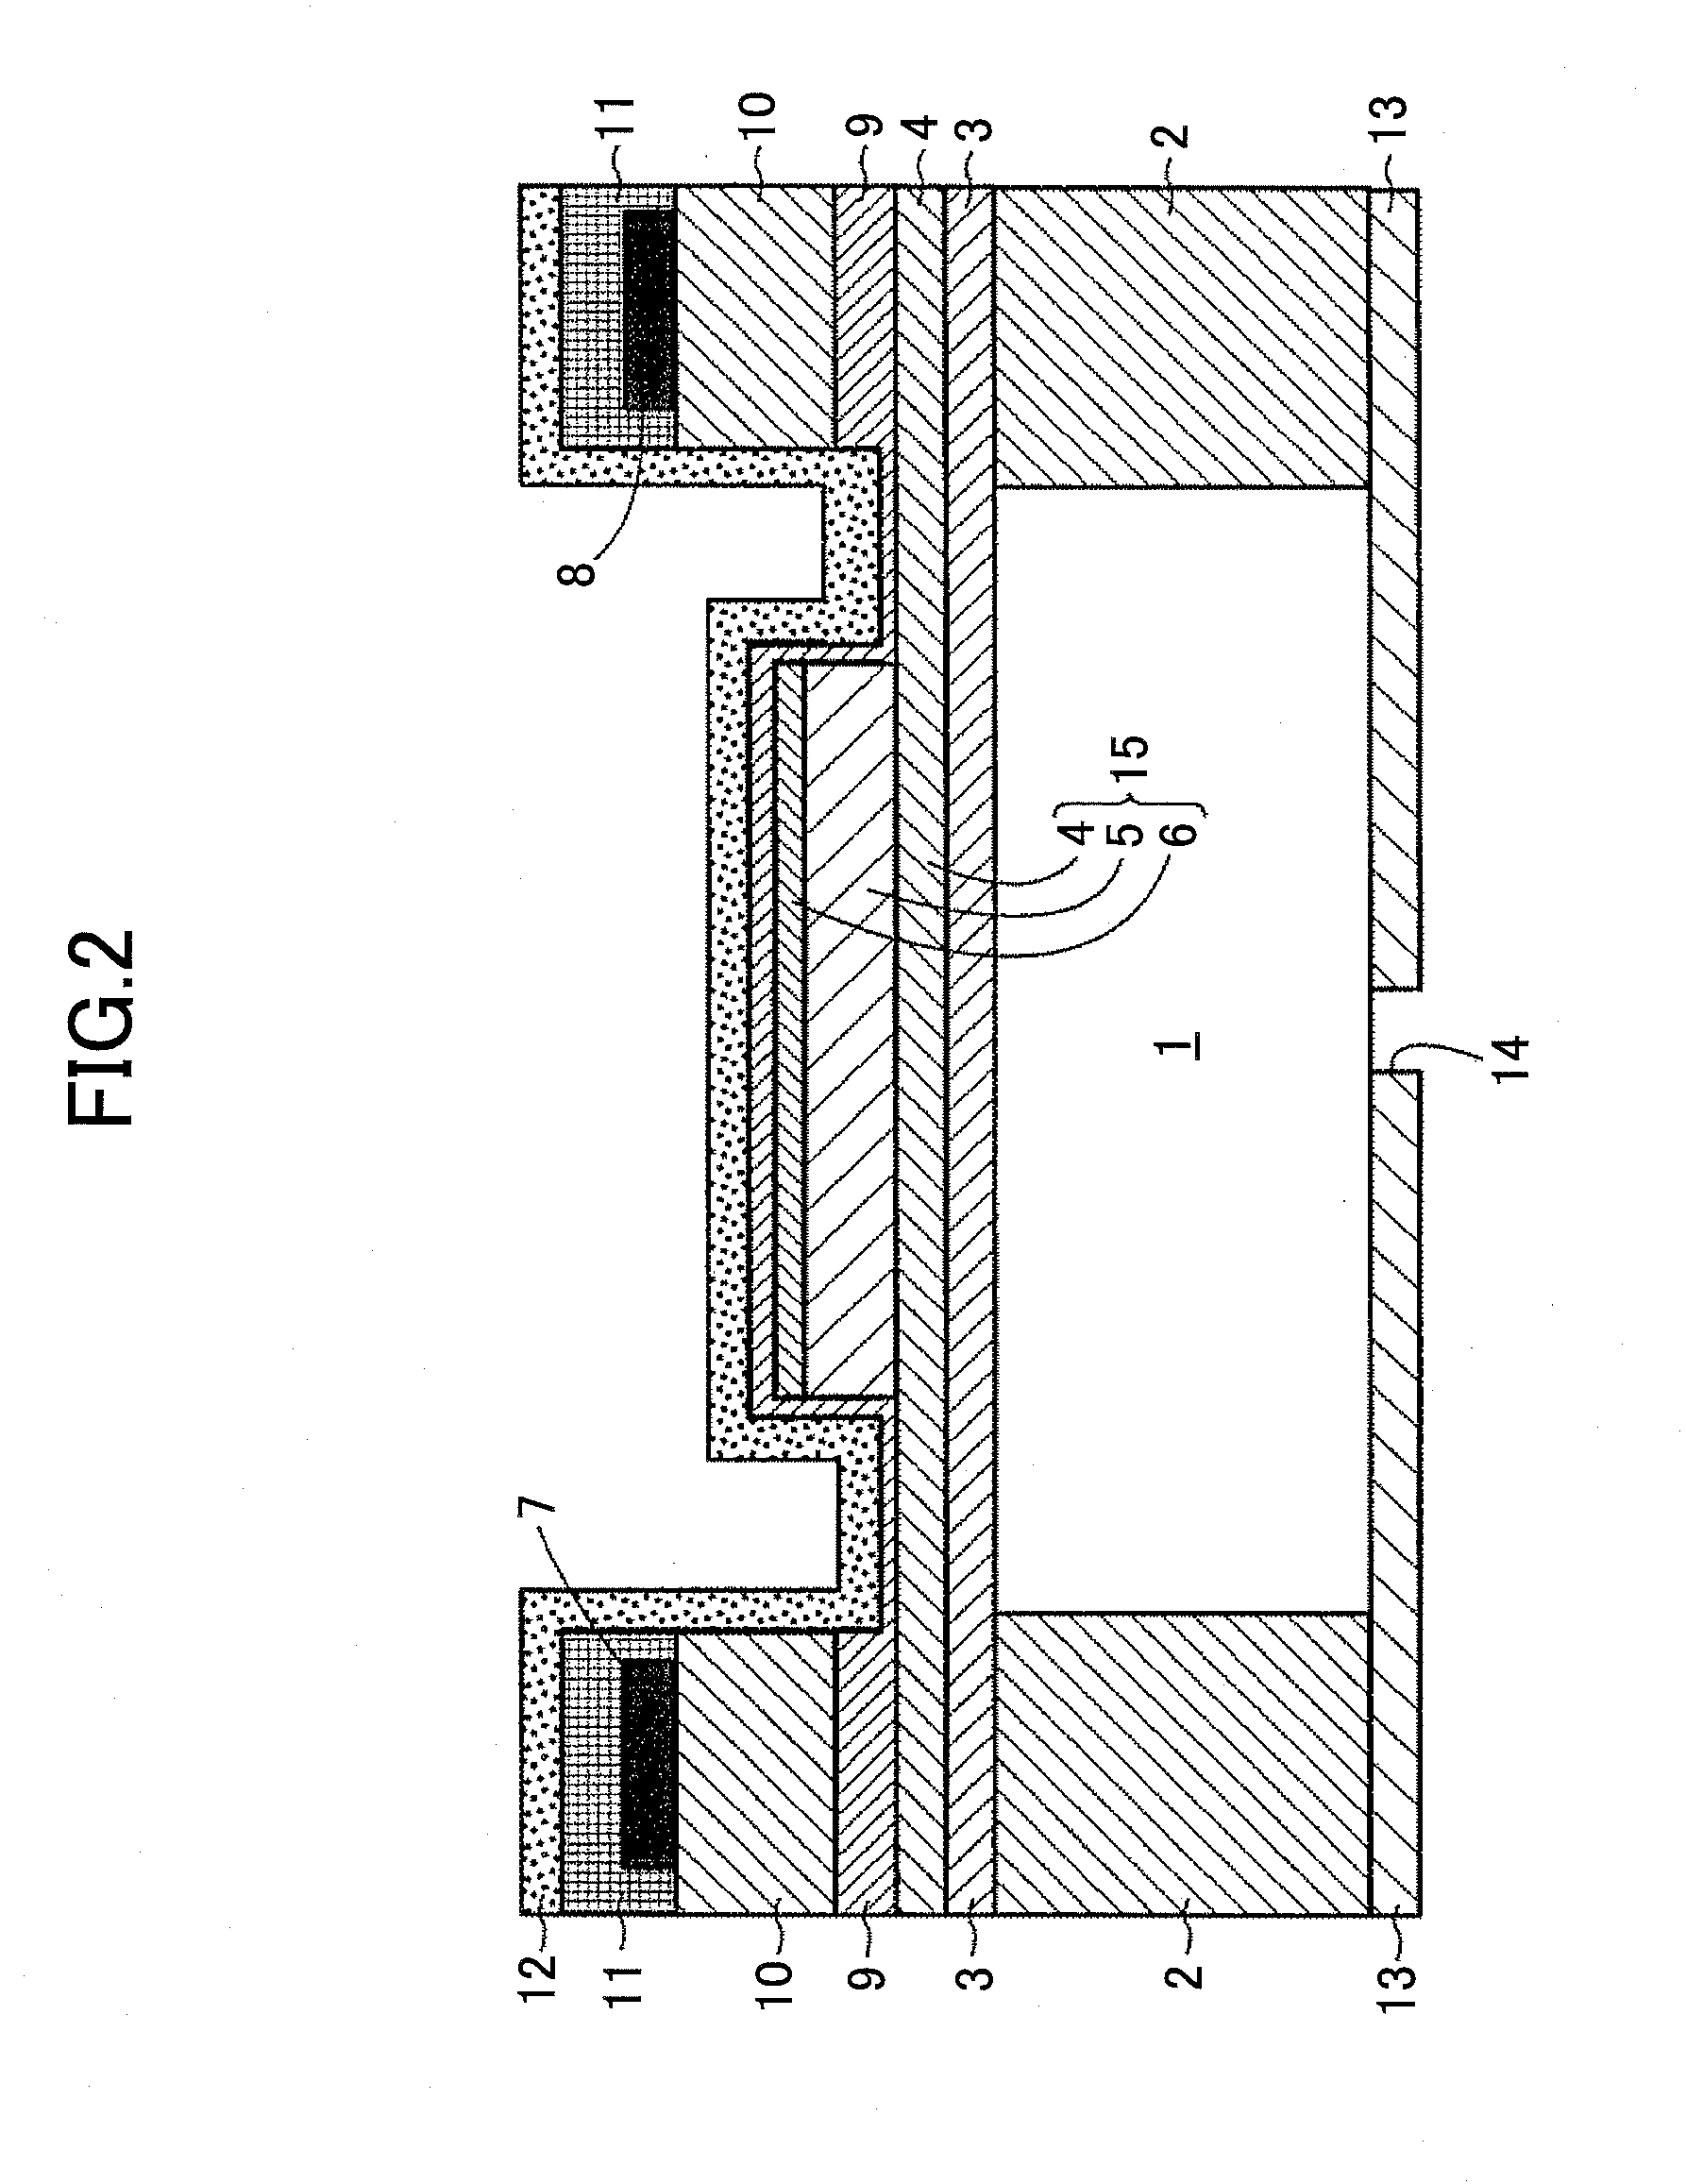 Inkjet head, inkjet recording apparatus, liquid droplet ejecting apparatus, and image forming apparatus